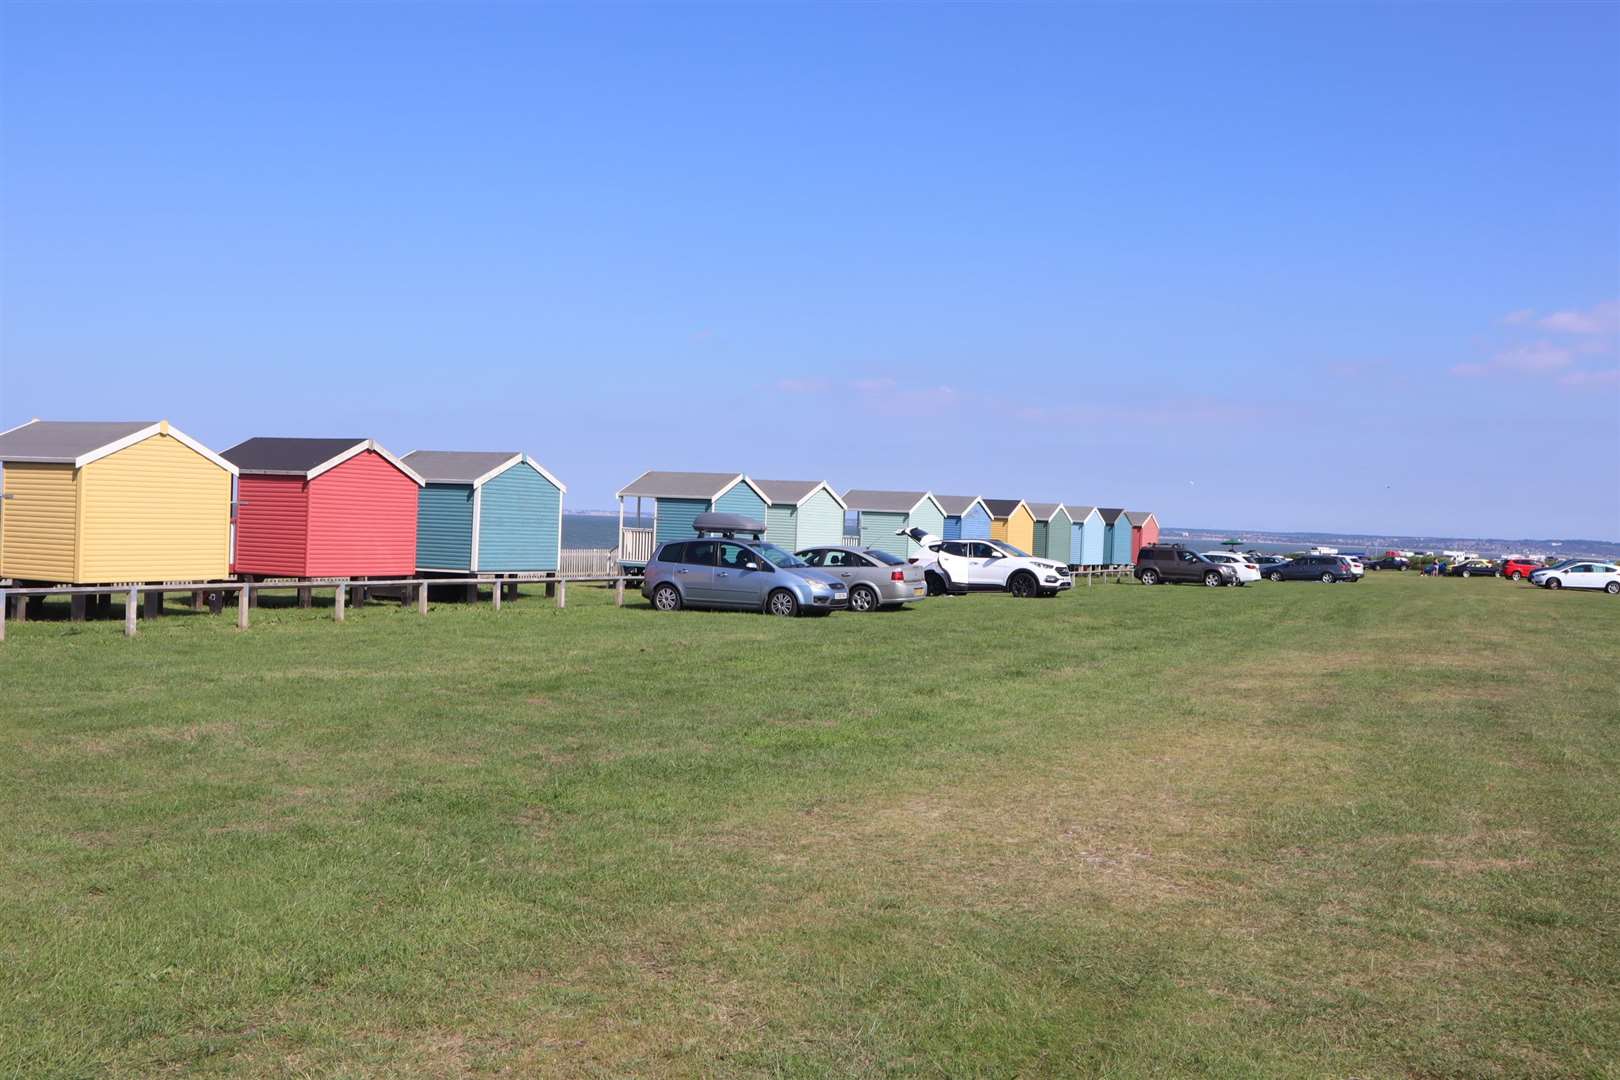 Large car park by Leysdown beach huts but no room for coaches